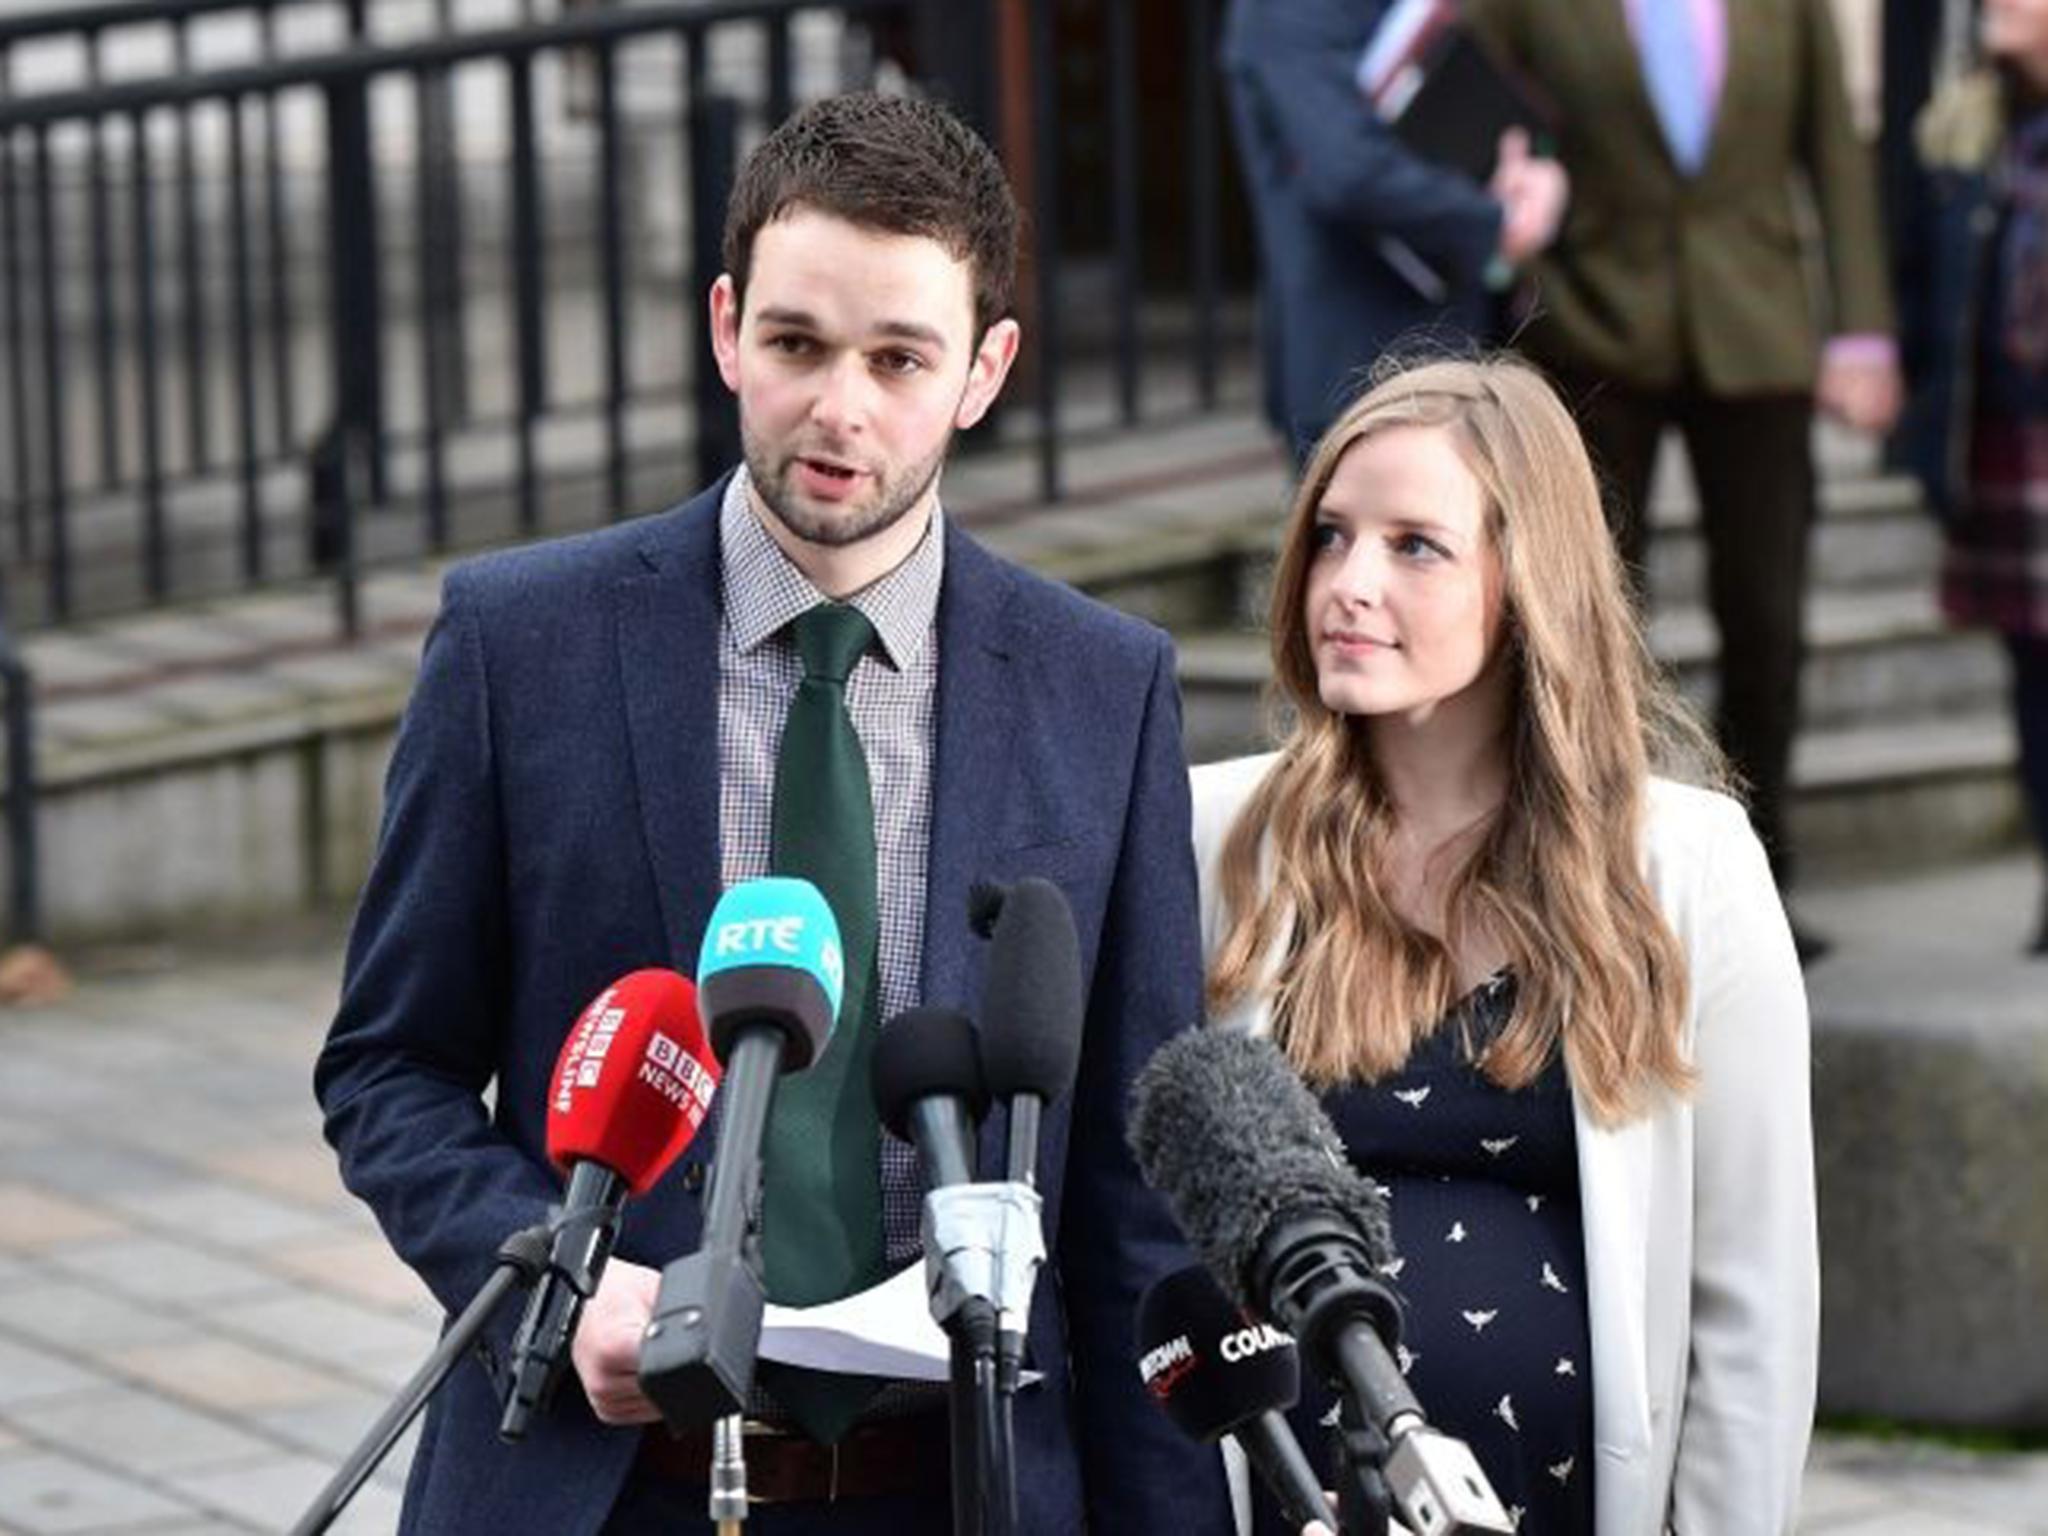 Daniel McArthur, managing director of Ashers Bakery and his wife Amy McArthur outside the High Court in Belfast